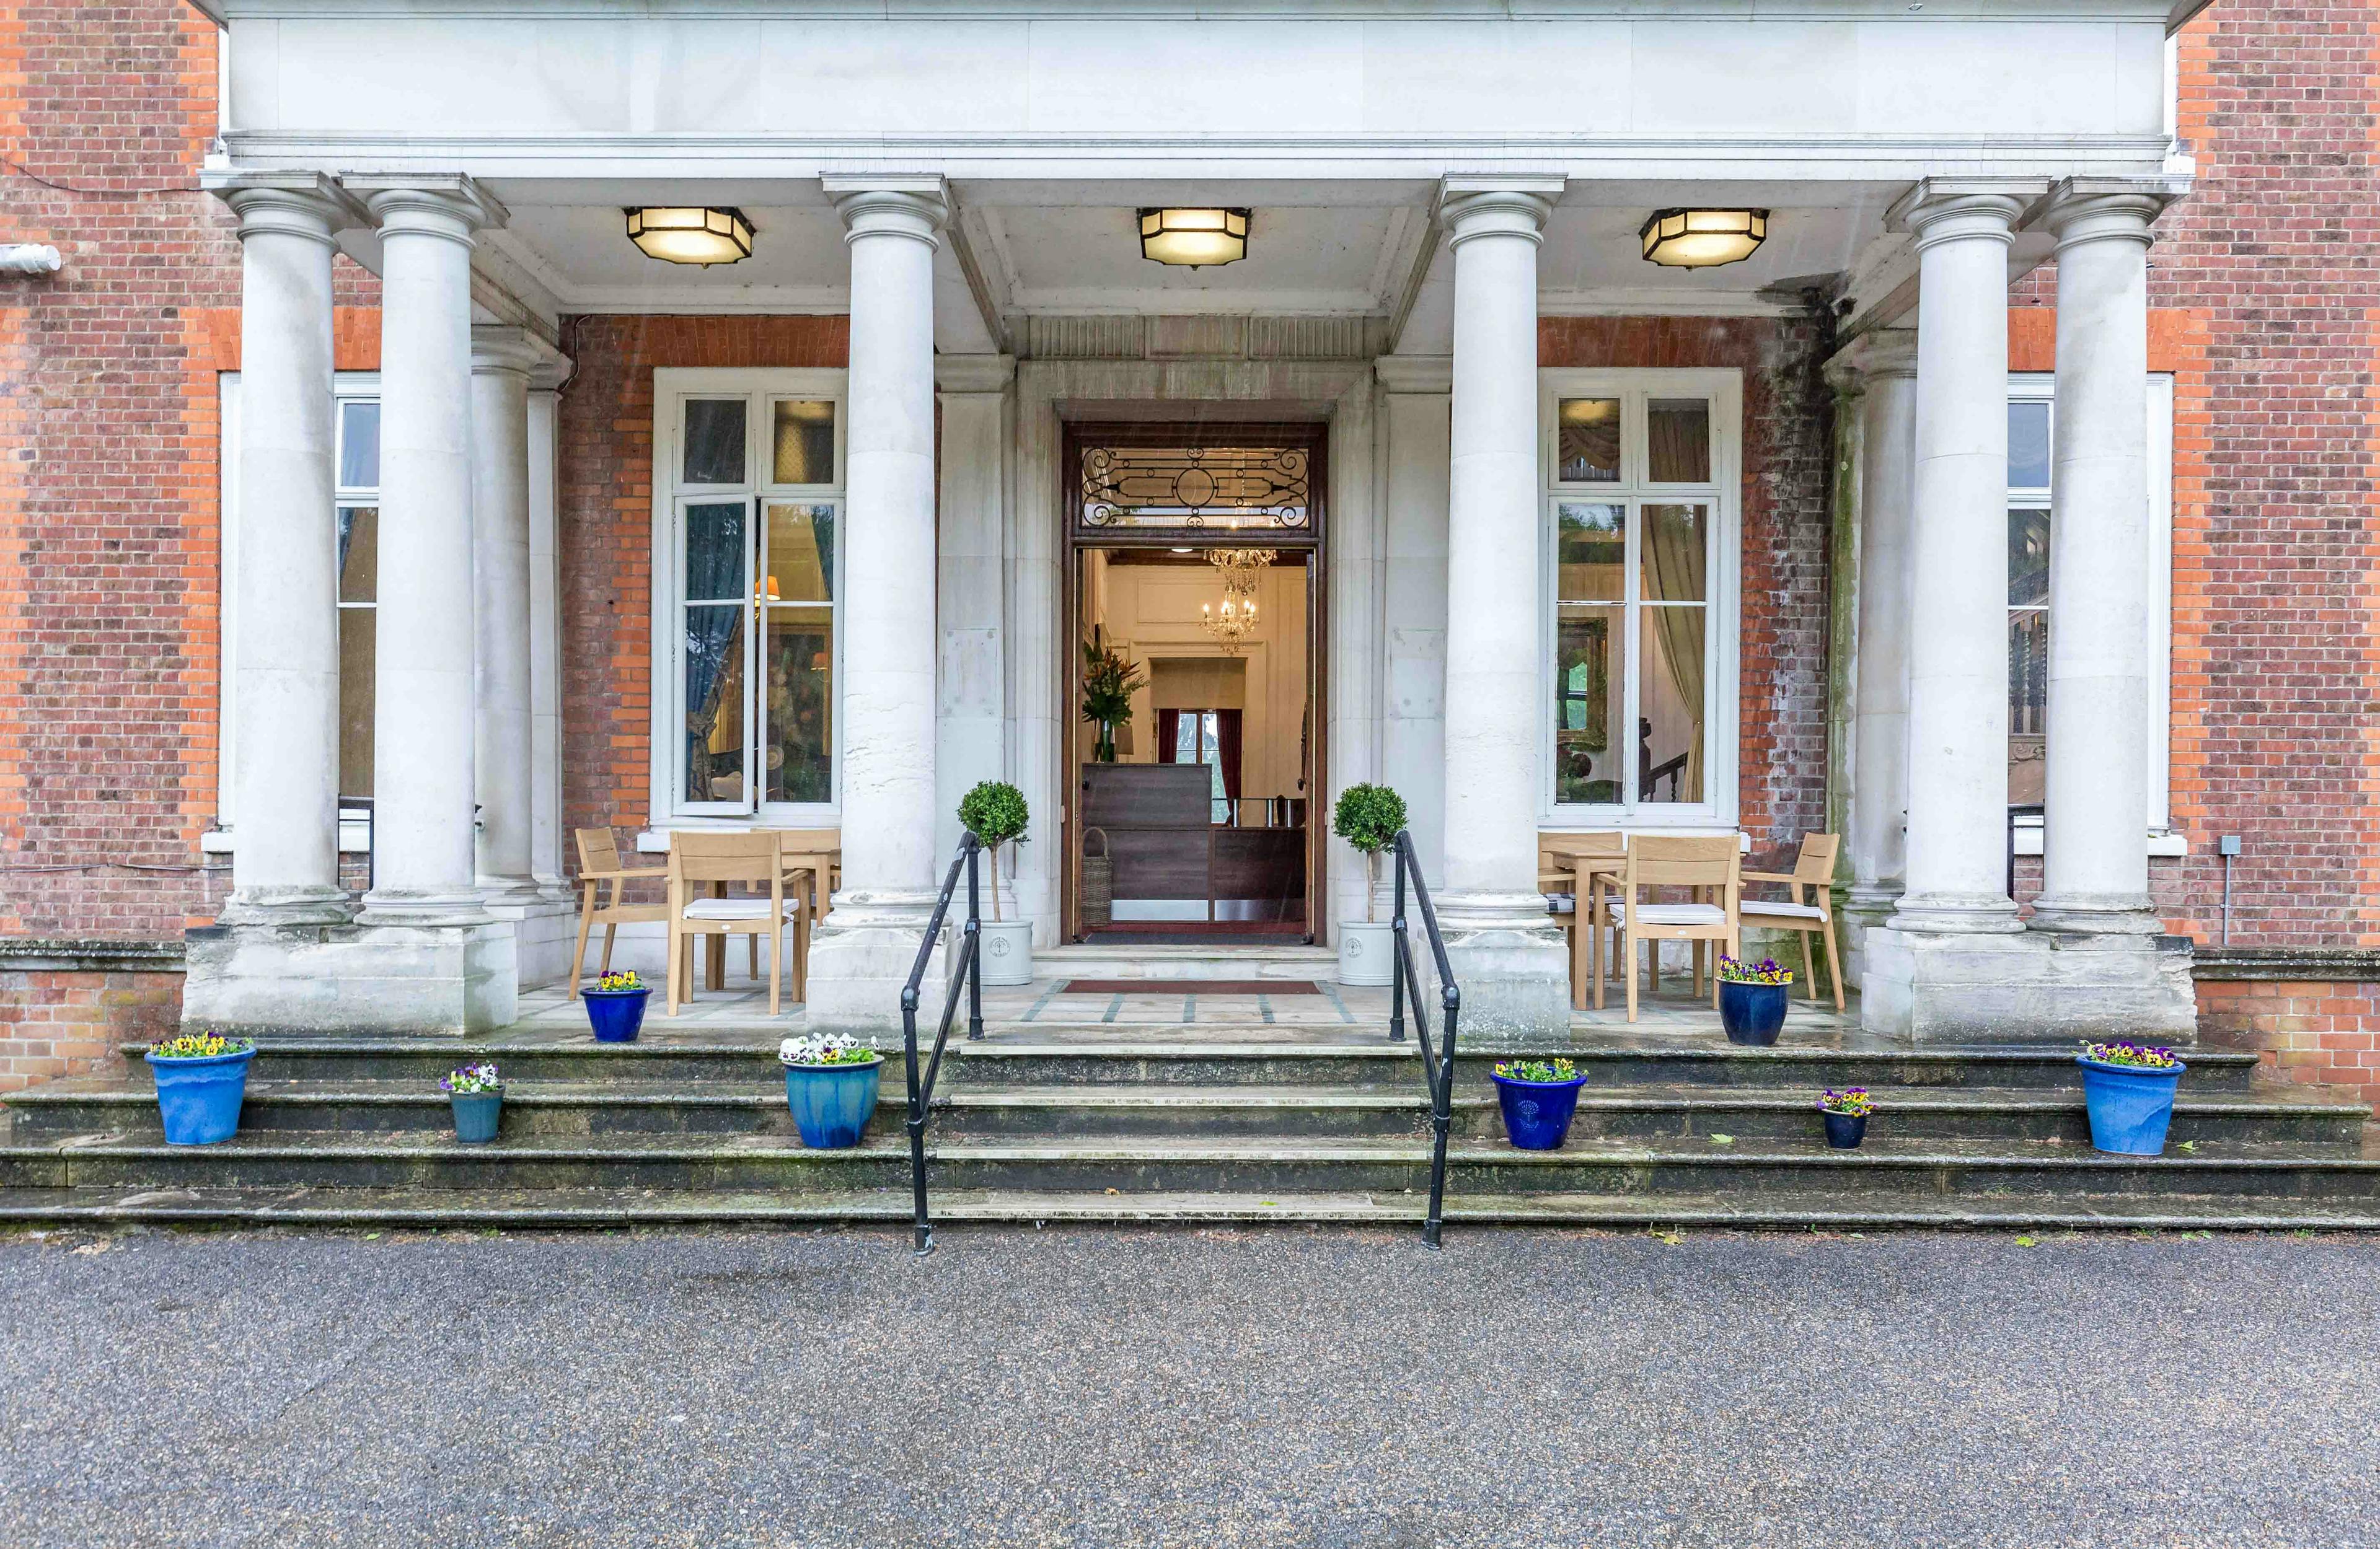 Exterior of Southgate Beaumont Care Home in London, England